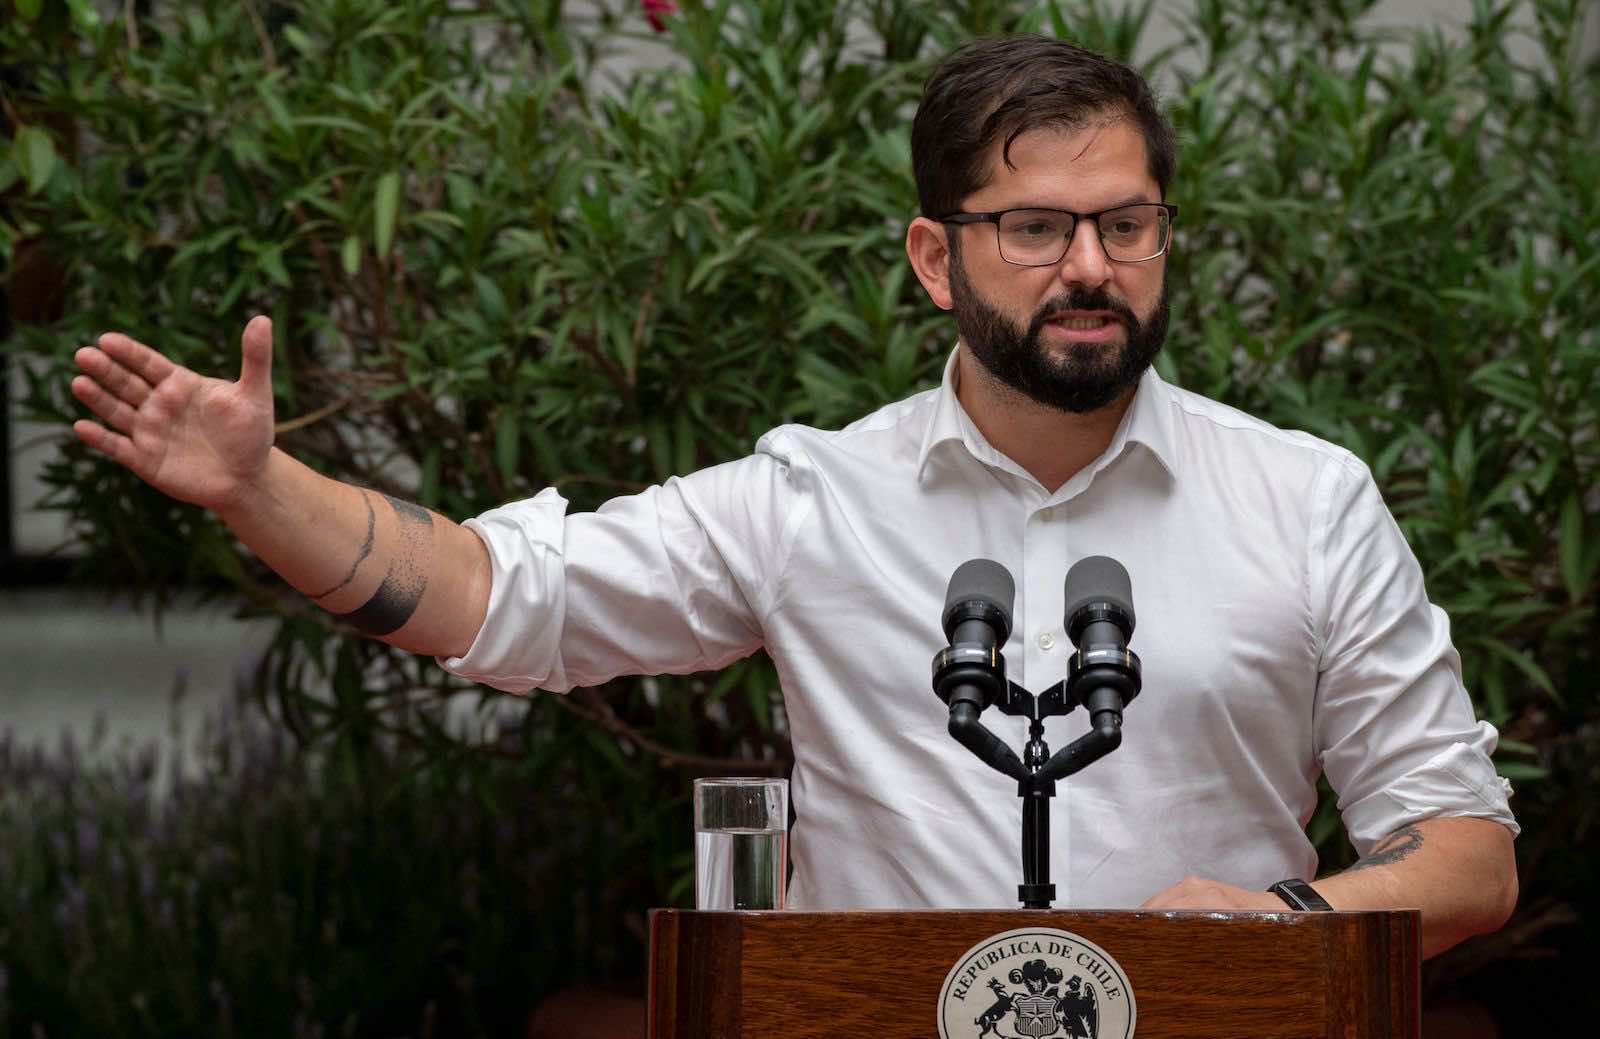 What was Gabriel Boric’s role in the civilian unrest in 2019 when he entered politics